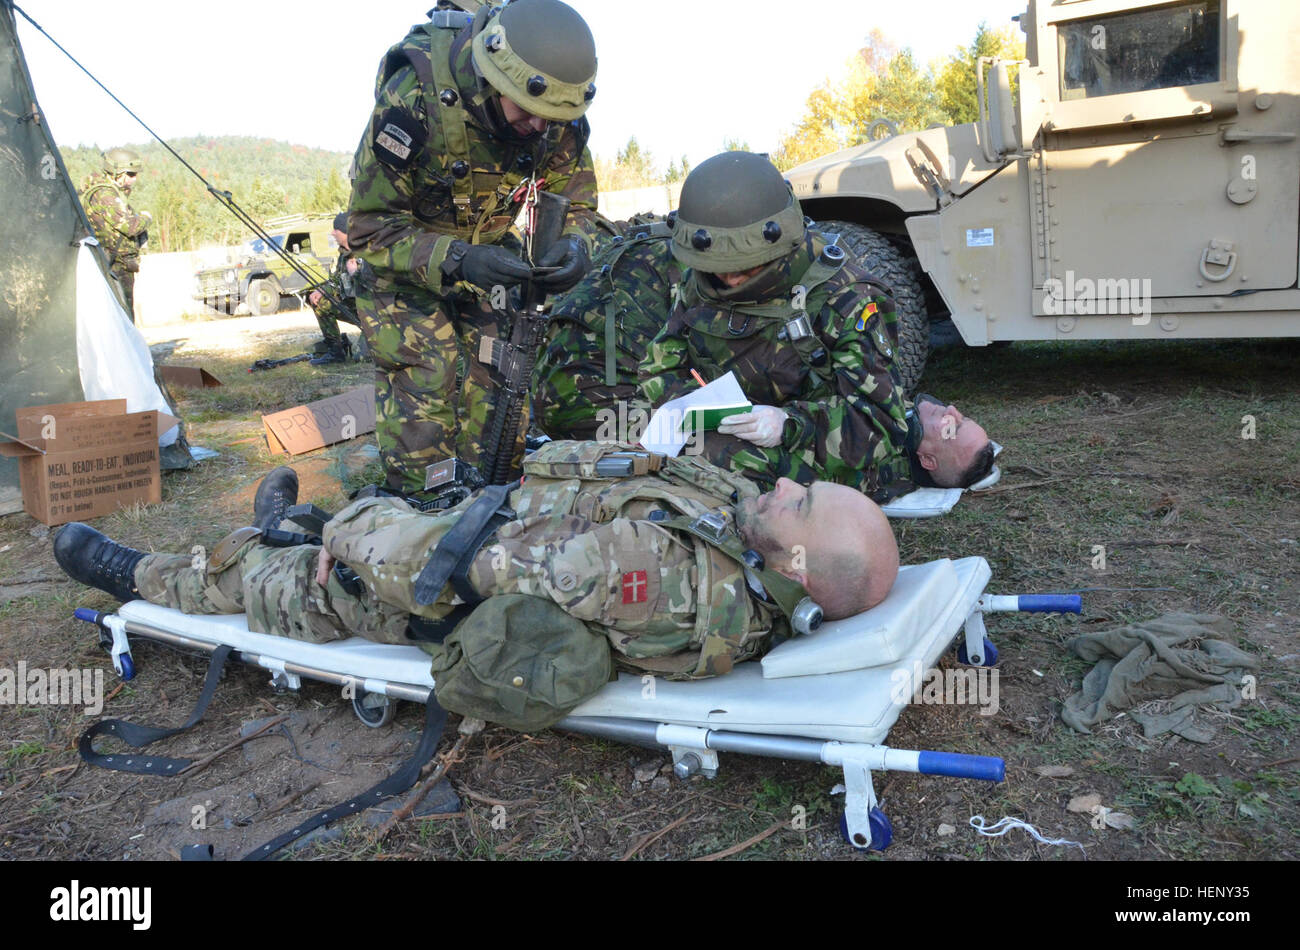 Romanian soldiers of the 21st Mountain Battalion fill out a 9-Line medical evacuation request form during exercise Combined Resolve III at the Joint Multinational Readiness Center in Hohenfels, Germany, Nov. 3, 2014.  Combined Resolve III is a multinational exercise, which includes more than 4,000 participants from NATO and partner nations, and is designed to provide a complex training scenario that focuses on multinational unified land operations and reinforces the U.S. commitment to NATO and Europe. (U.S. Army photo by Pv2. Courtney Hubbard/Not Reviewed) Romanian, Danish forces at Combined R Stock Photo